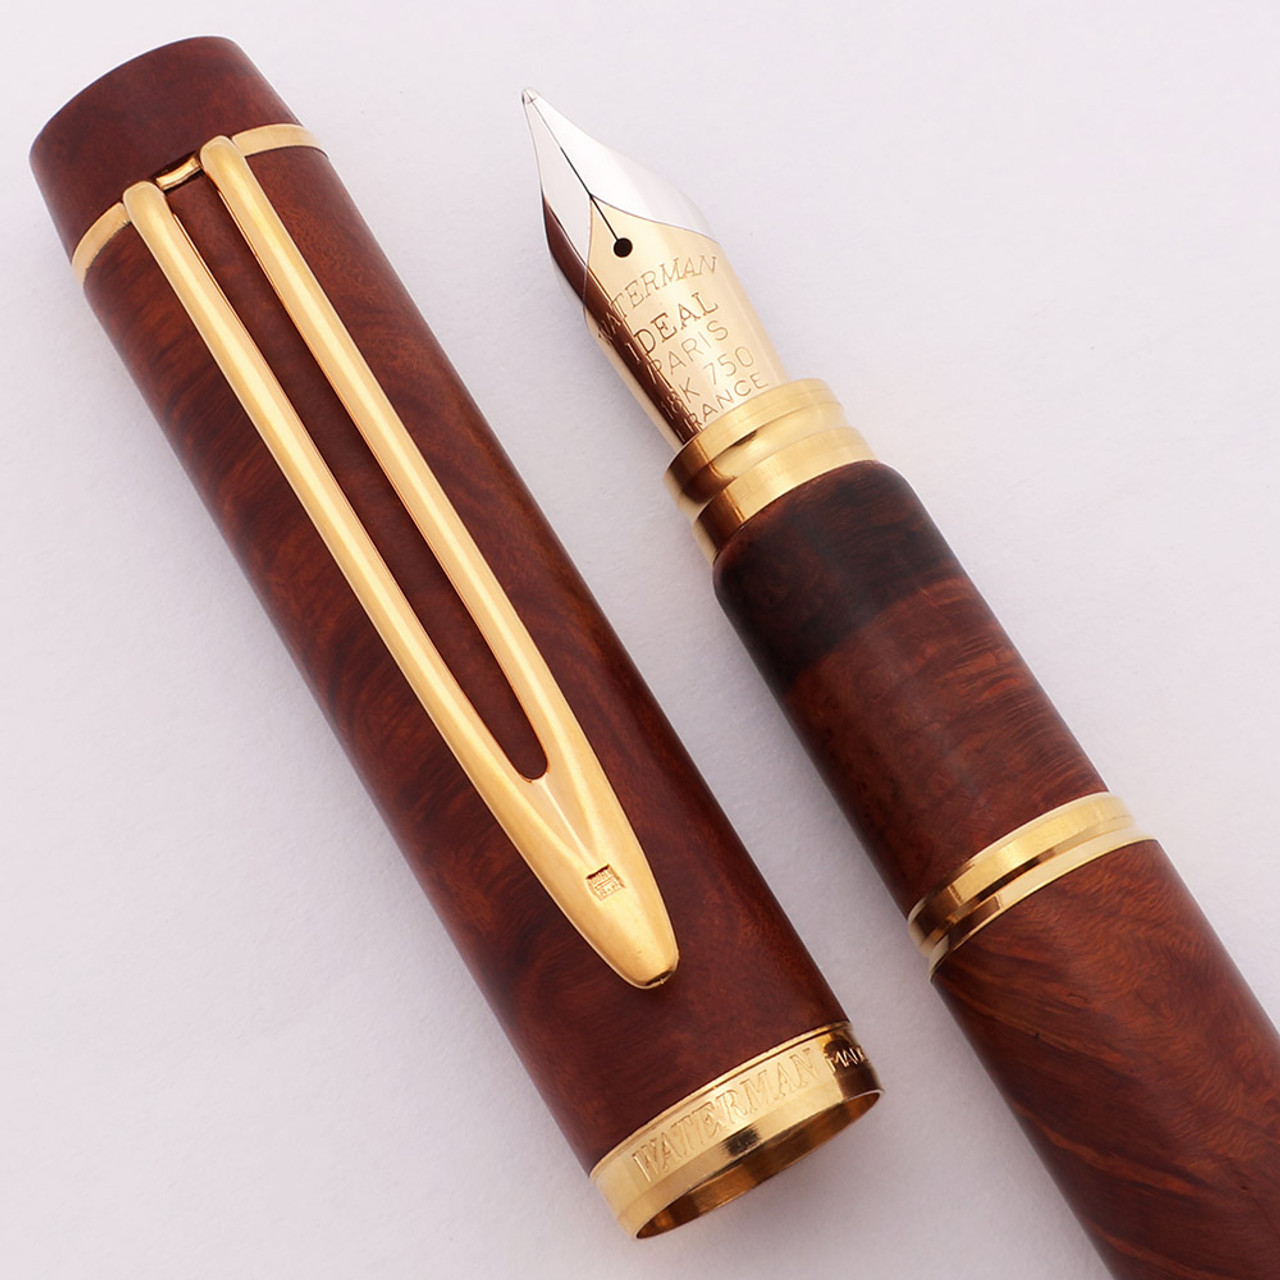 Waterman Le Man 100 Fountain Pen - "Olive Wood", w/GT, C/C, Medium 18k Ideal Two-Tone Nib (Excellent +, Works Well)